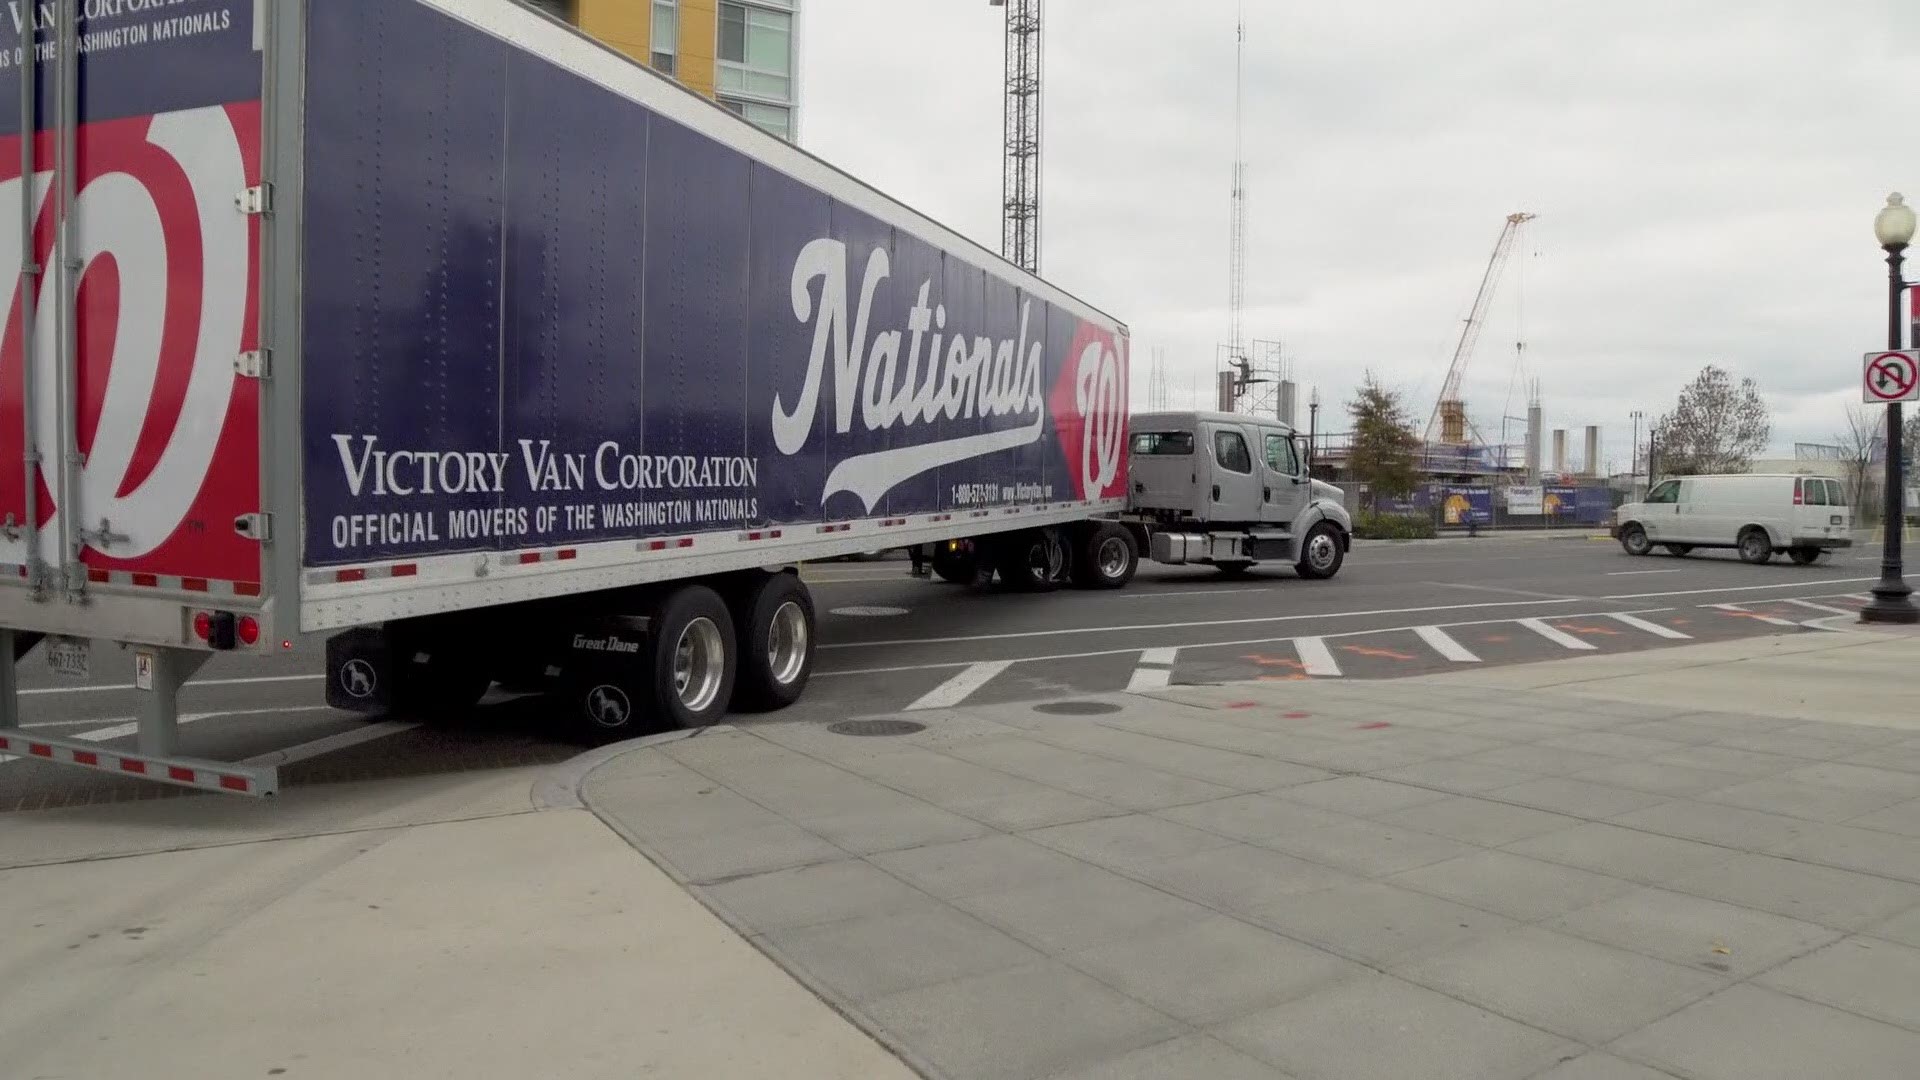 The Nationals shipped over an estimated $500,000 worth of equipment to its Spring Training facility in West Palm Beach.